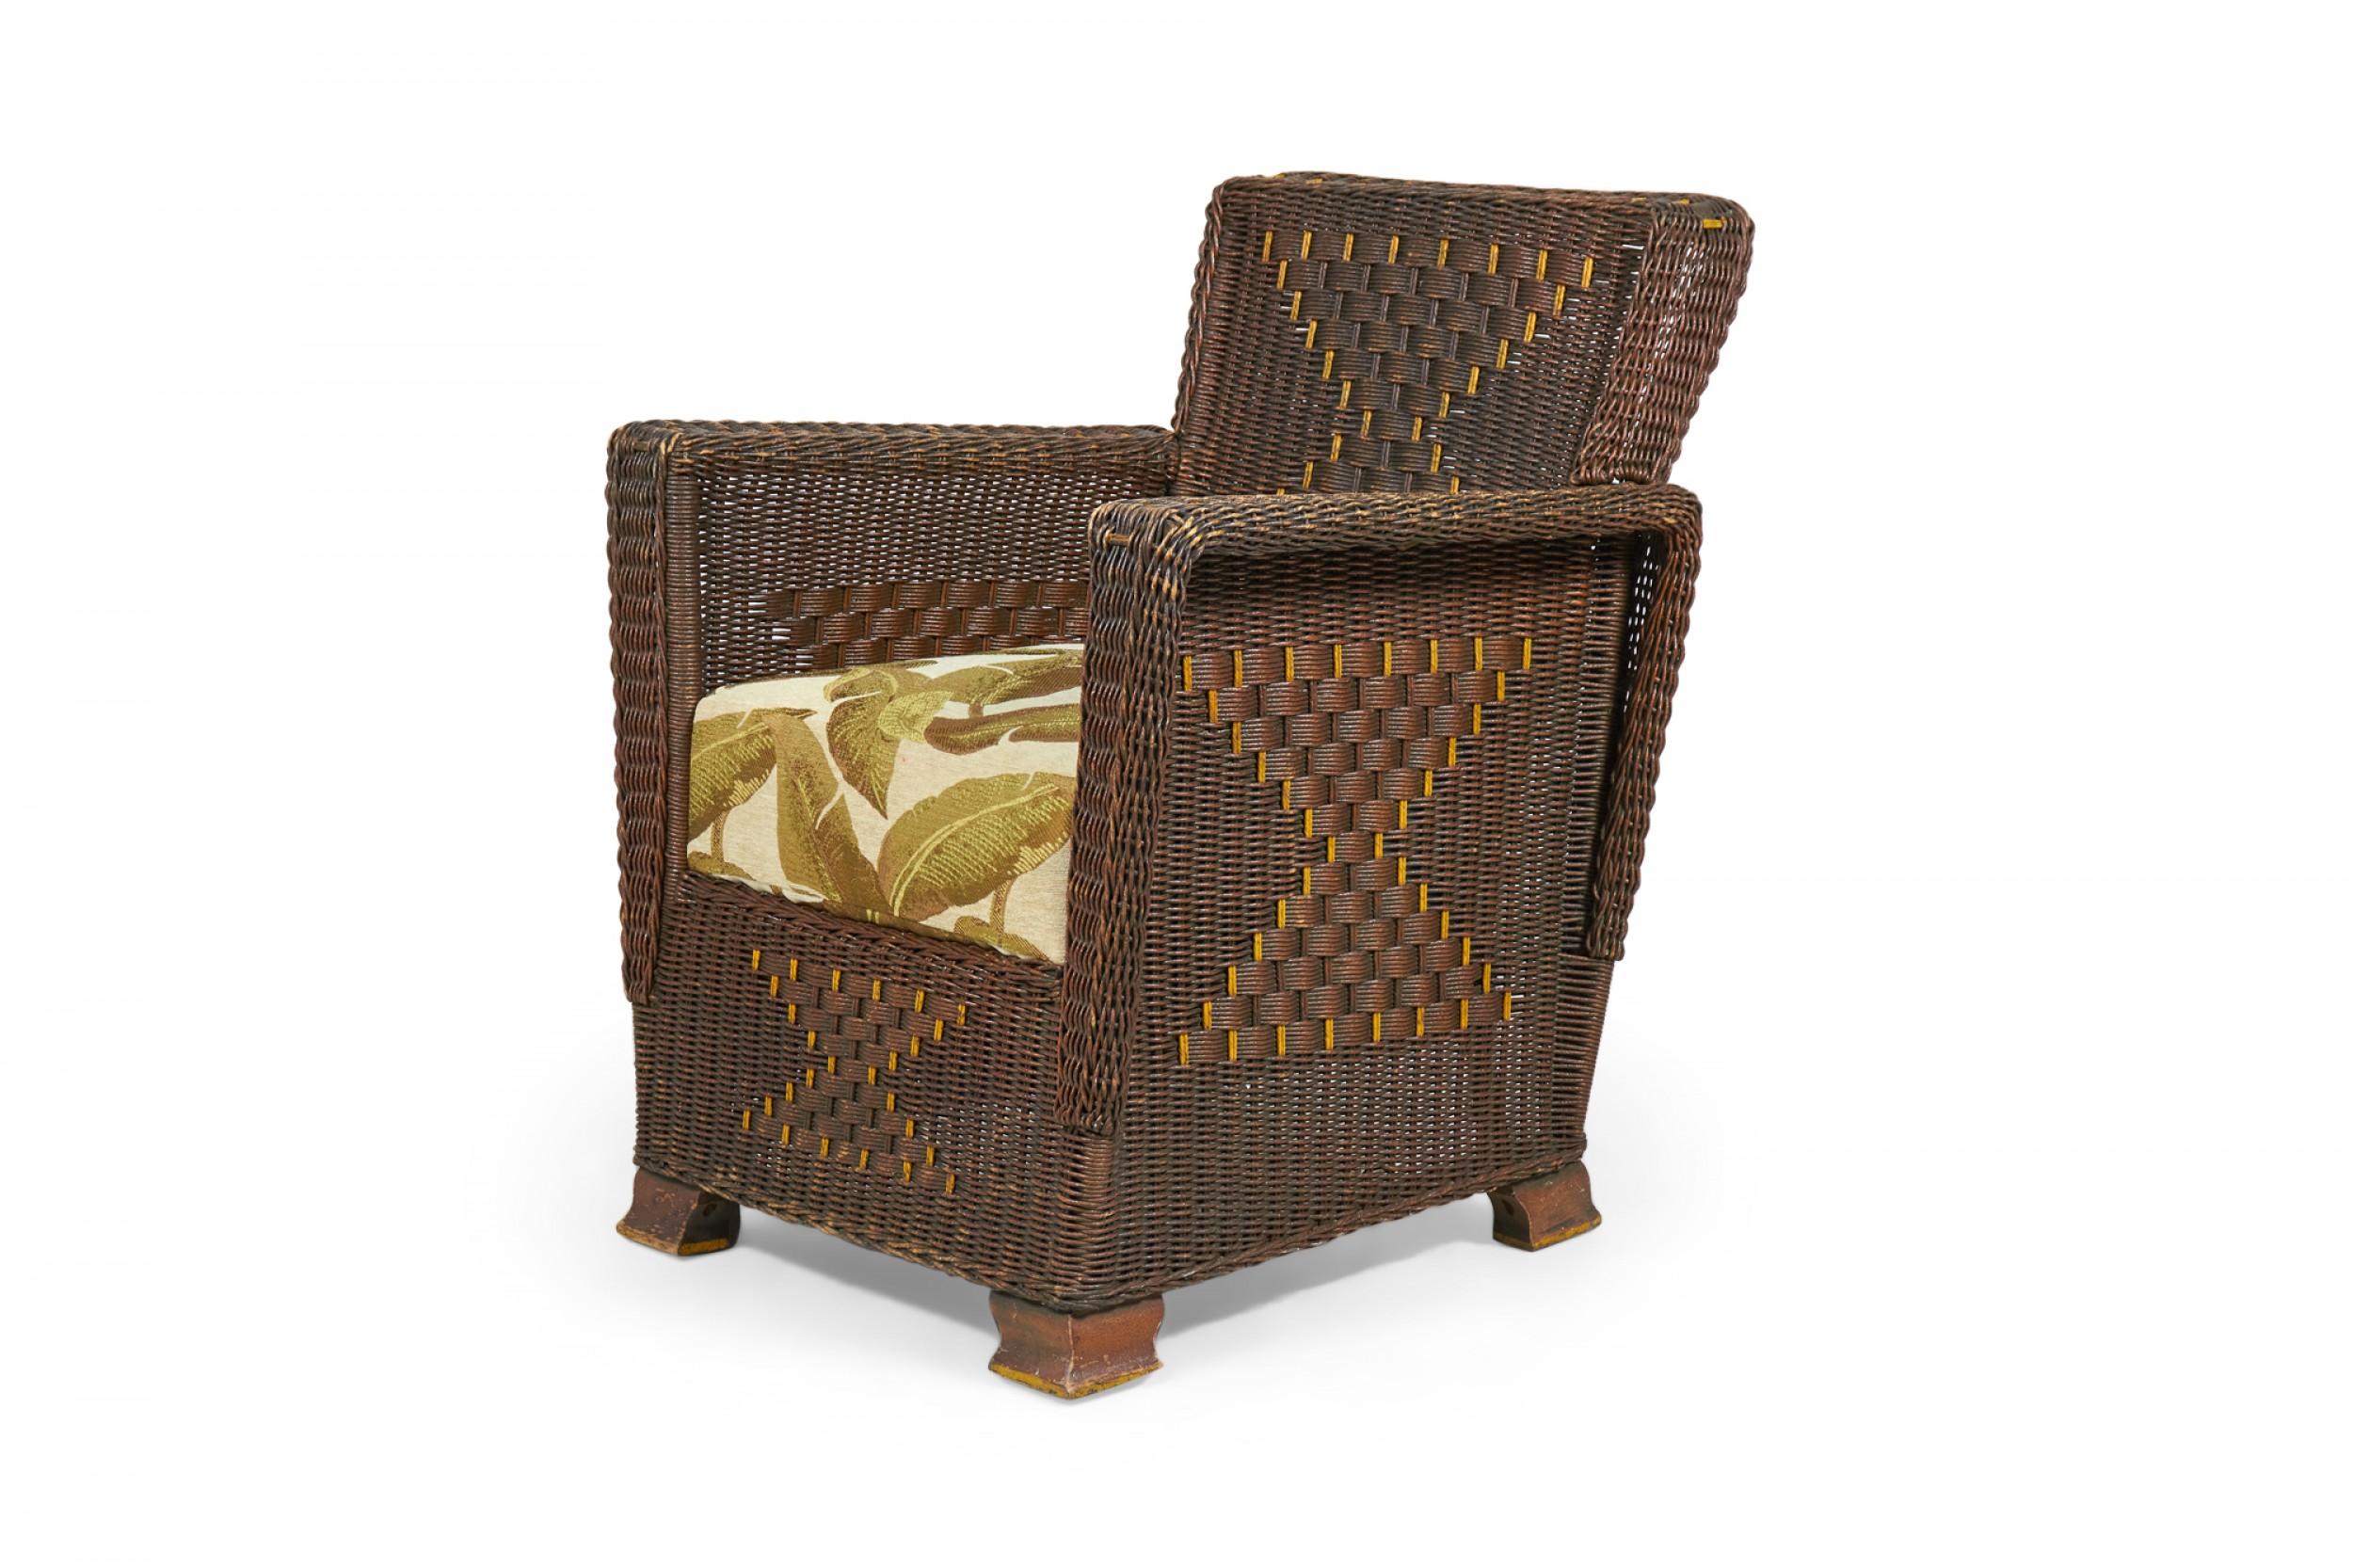 American Art Deco 3-piece dark brown wicker salon set comprised of a three-seat settee, a rocking chair, and an armchair, all with squared backs and arms with a woven hourglass pattern throughout and custom golden palm frond patterned seat cushions.